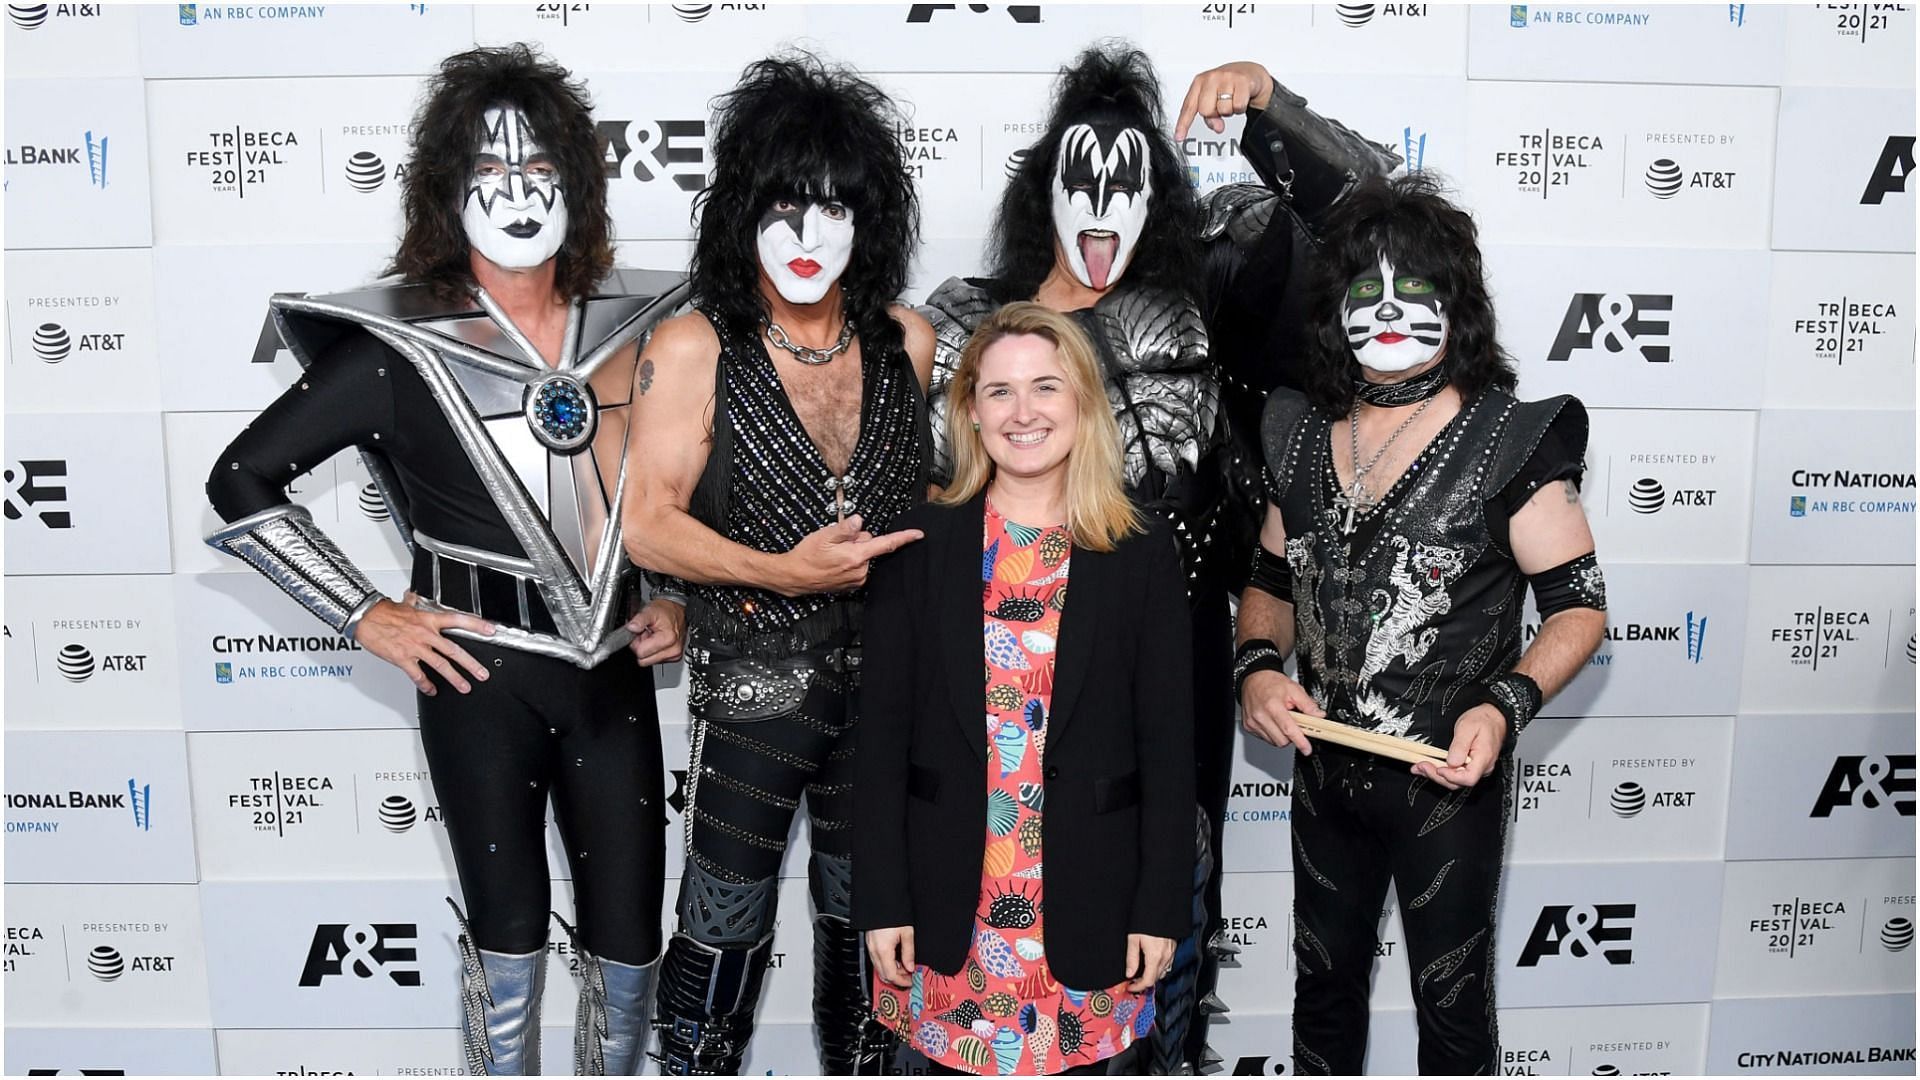 Tommy Thayer, Paul Stanley, Cara Cusumano, Gene Simmons, and Eric Singer at the Tribeca Festival screening of &quot;Biography: KISStory&quot; at Battery Park on June 11, 2021 in New York City. (Image via Getty Images)